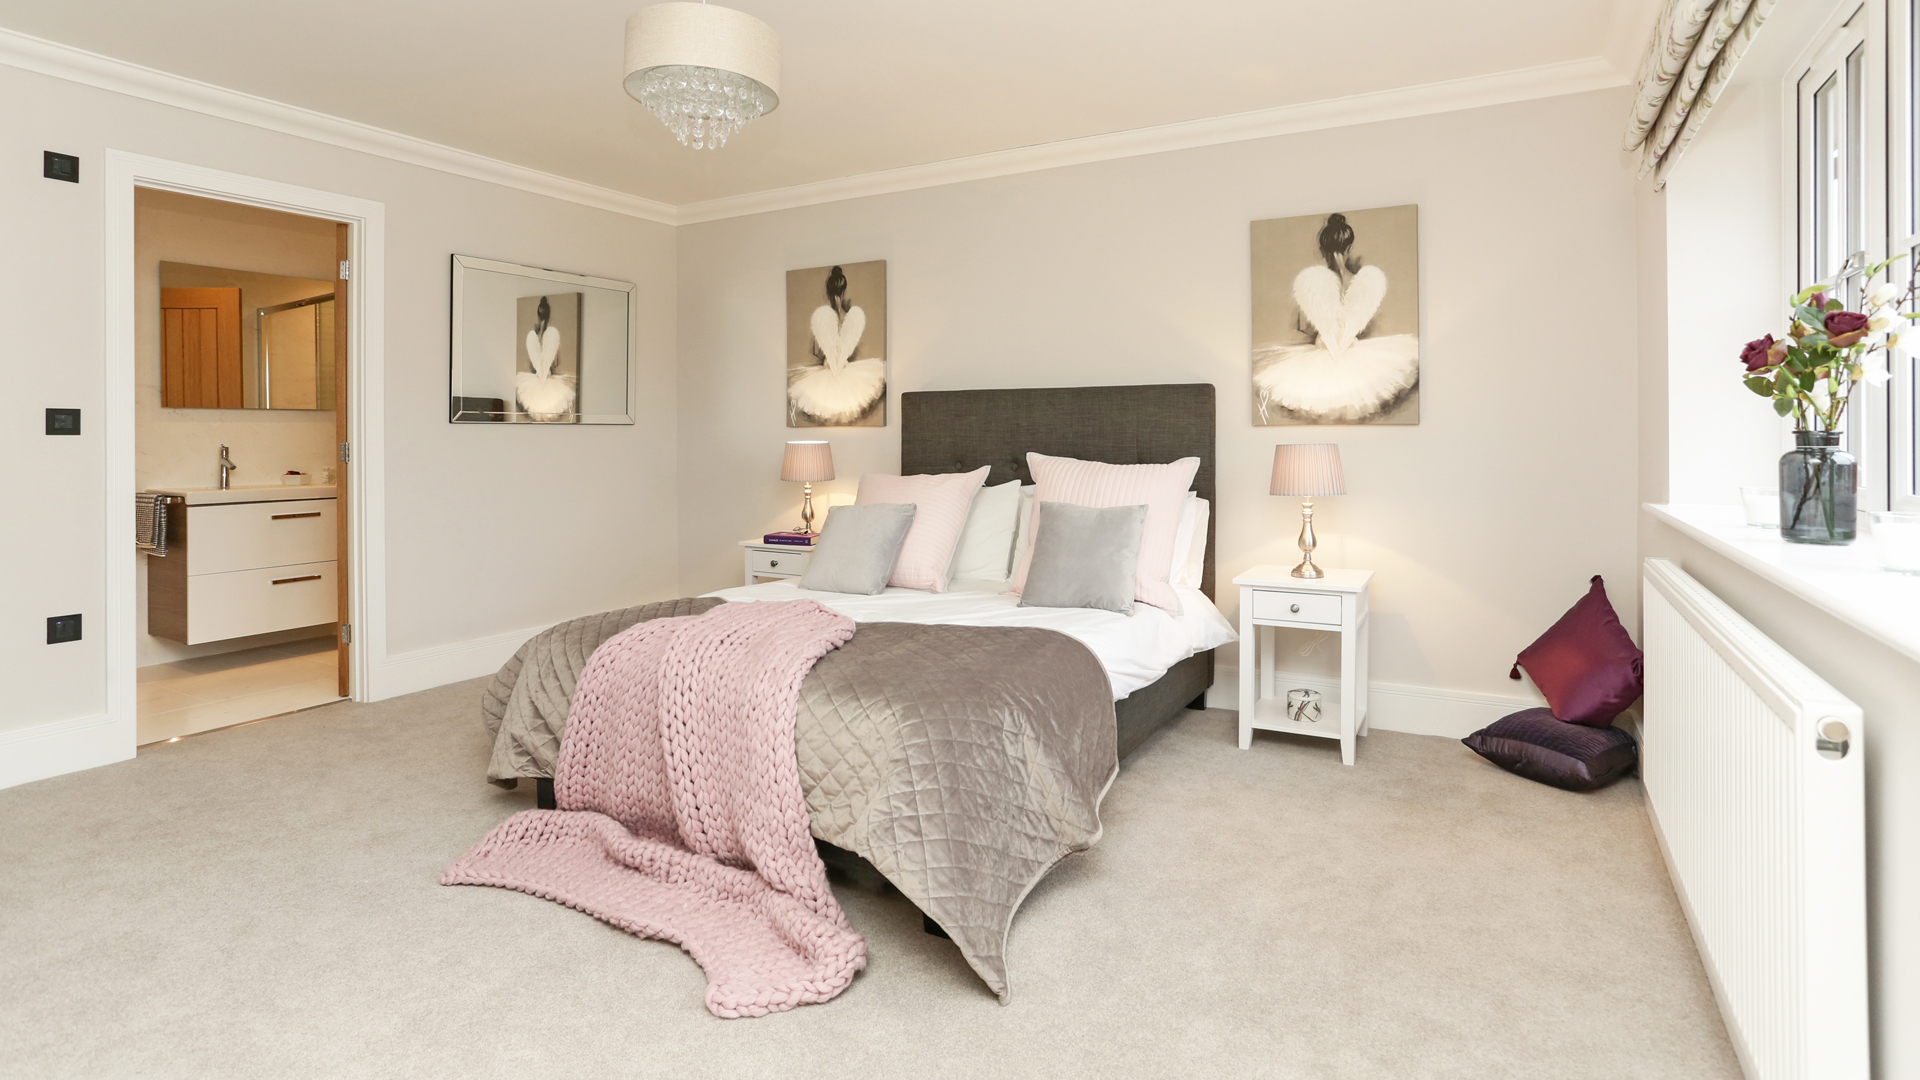 Bedroom at our weavers park development with ensuite.